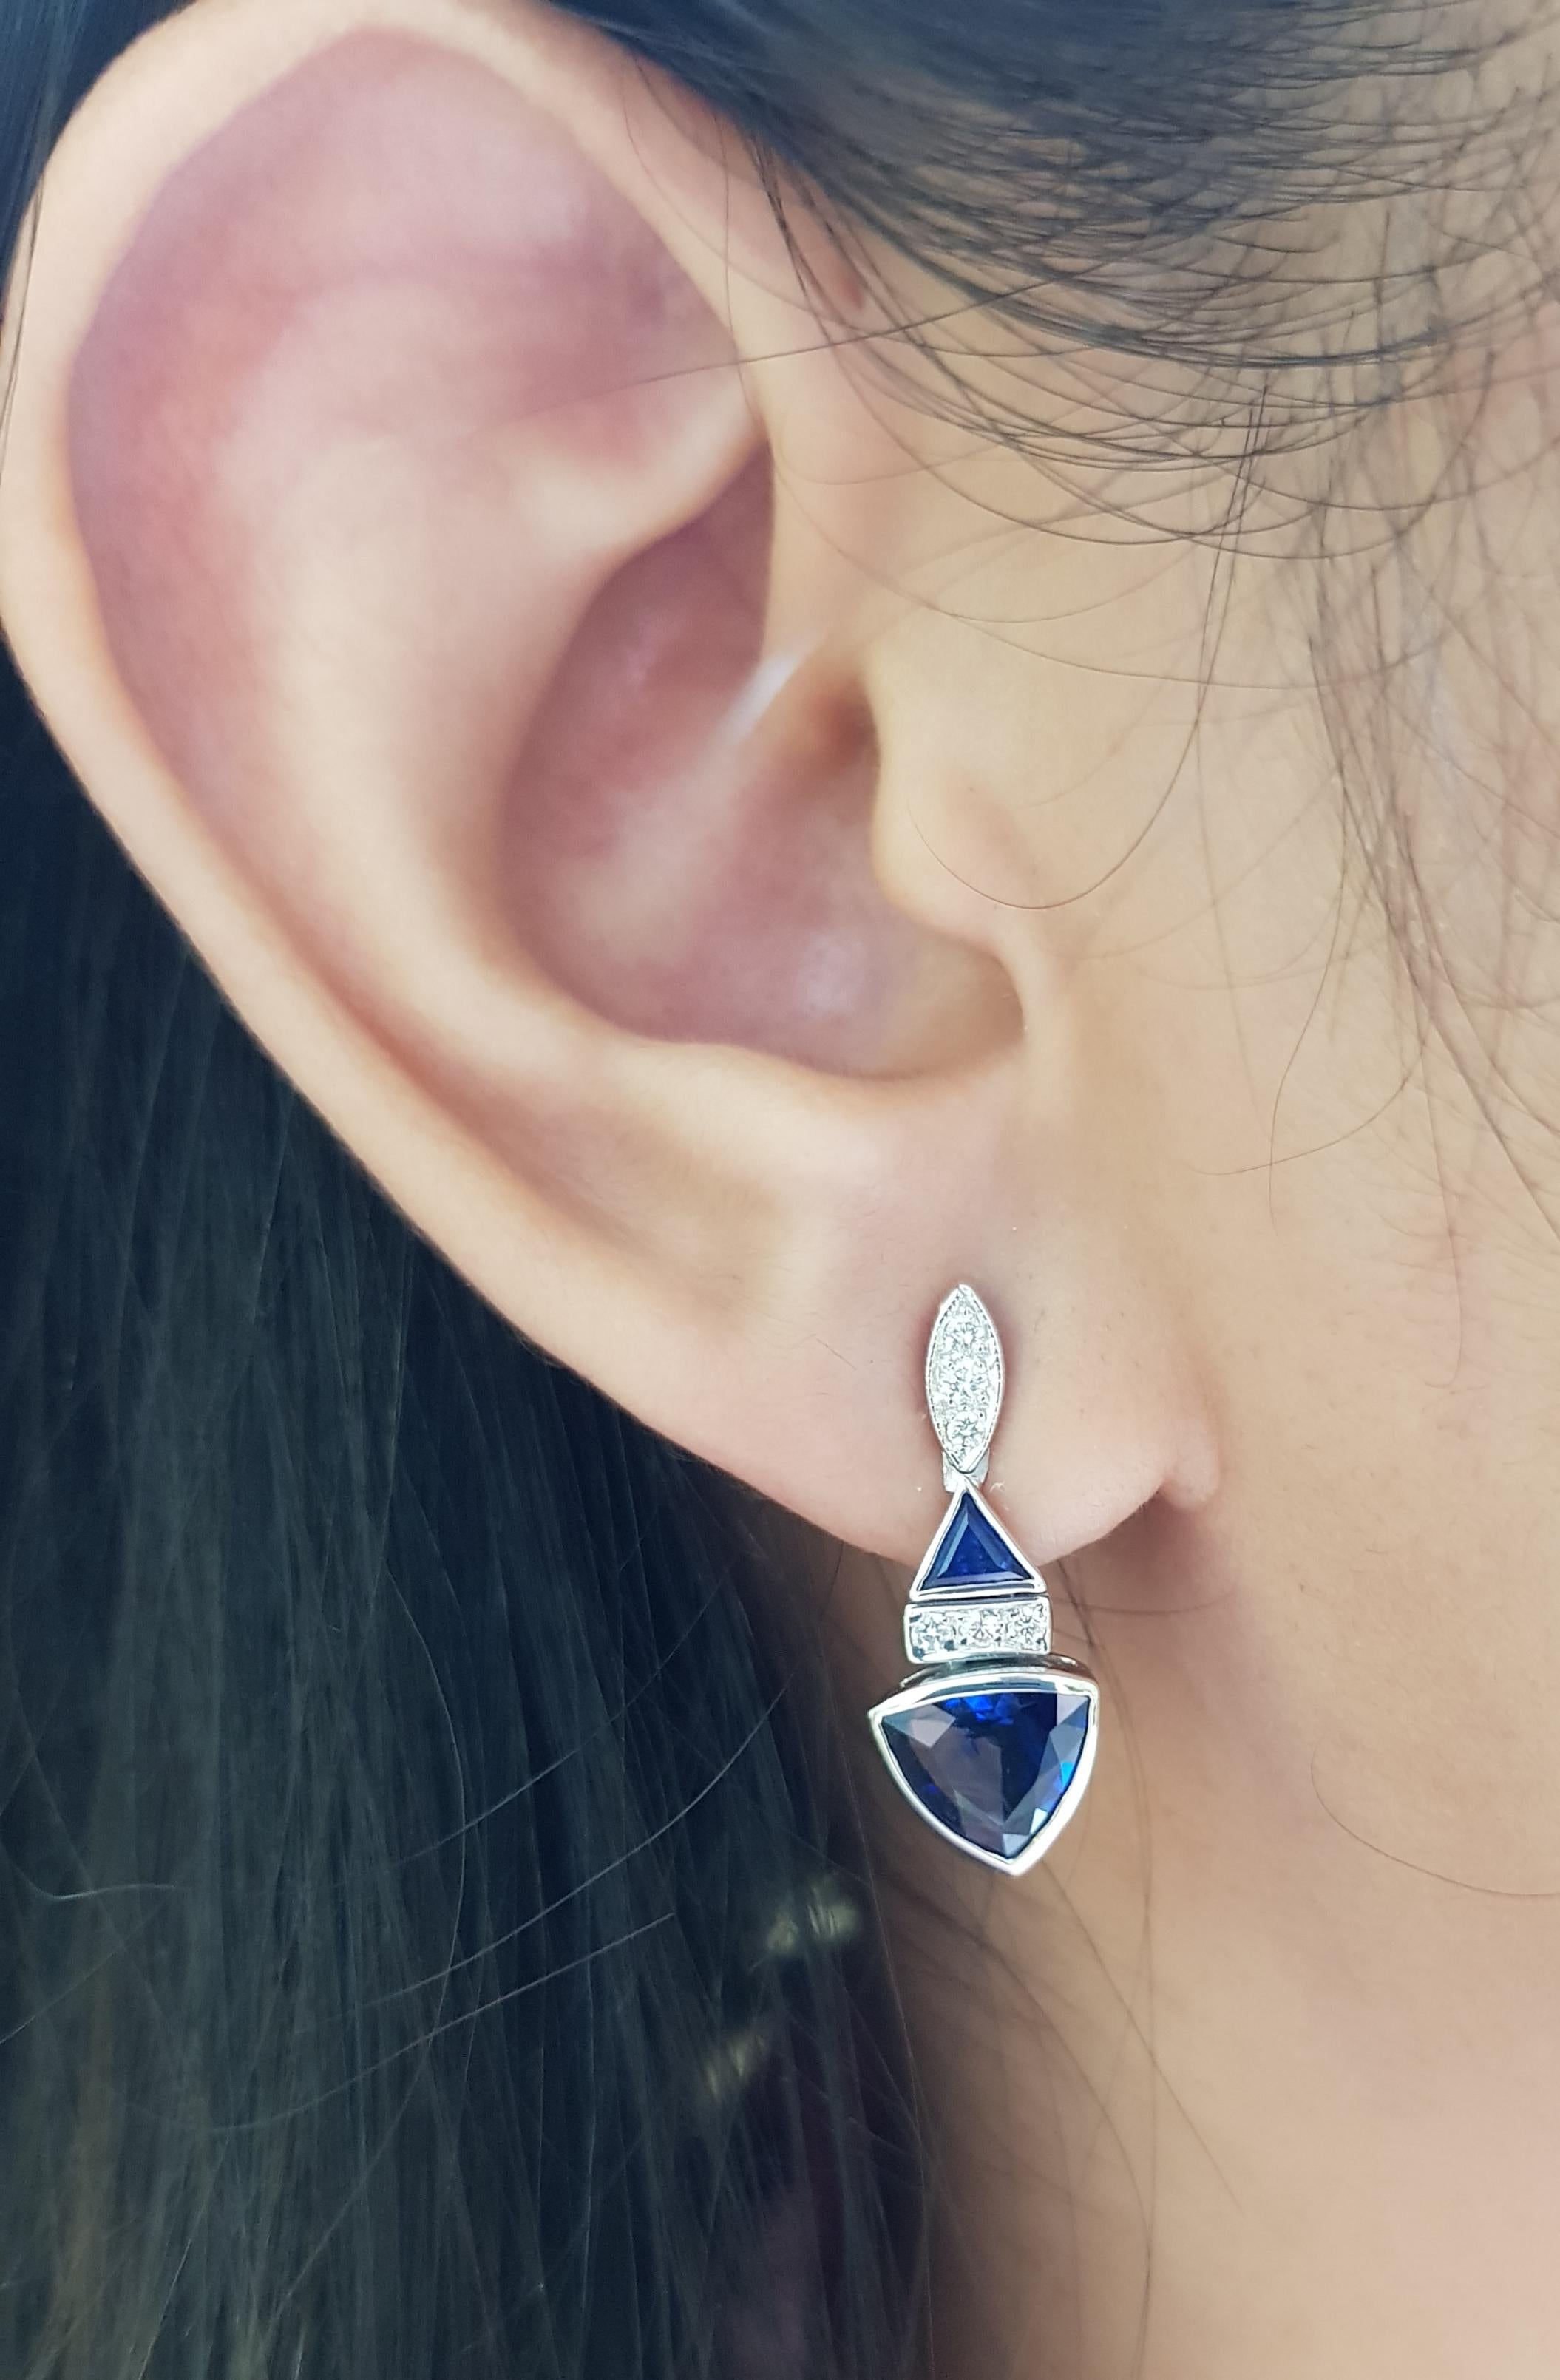 Blue Sapphire 2.61 carats with Blue Sapphire 0.81 carat and Diamond 0.32 carat Earrings set in 18 Karat White Gold Settings

Width:  0.9 cm 
Length: 2.2 cm
Total Weight: 4.92 grams

